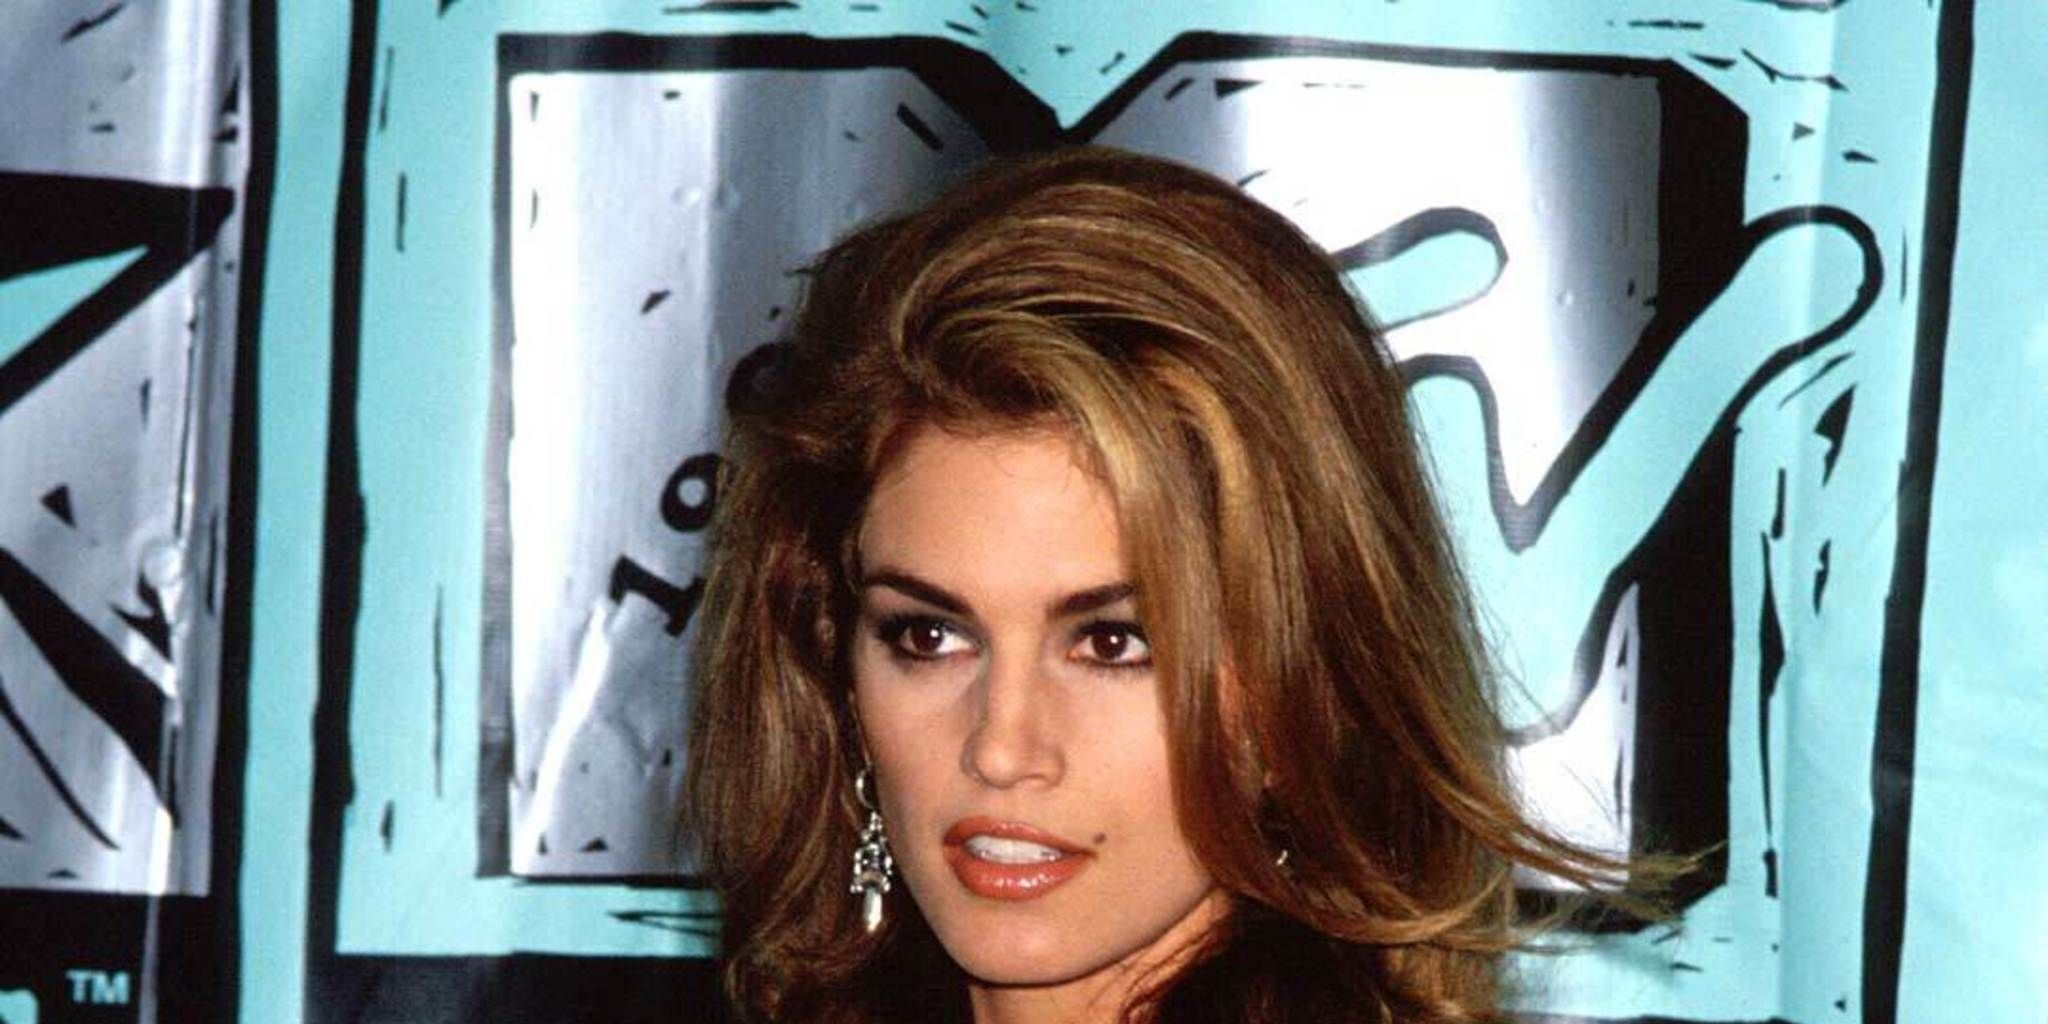 Cindy Crawford Credits These Hair Products For Her Signature Blowout   SheKnows